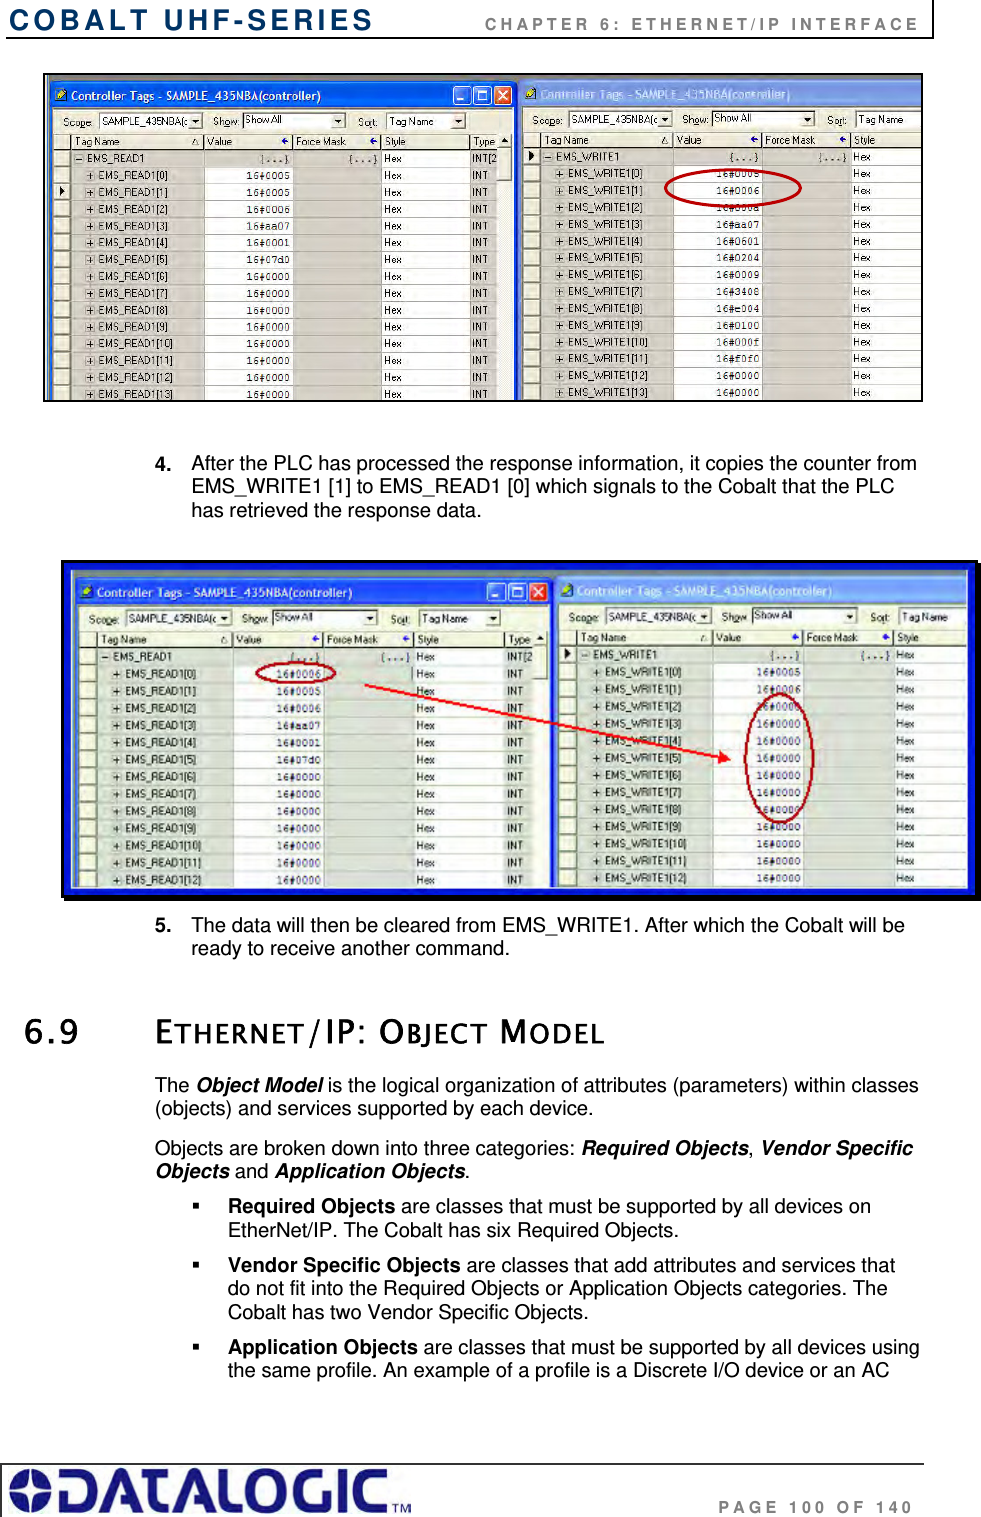 COBALT UHF-SERIES    CHAPTER 6: ETHERNET/IP INTERFACE                                     PAGE 100 OF 140  4.  After the PLC has processed the response information, it copies the counter from EMS_WRITE1 [1] to EMS_READ1 [0] which signals to the Cobalt that the PLC has retrieved the response data.    5.  The data will then be cleared from EMS_WRITE1. After which the Cobalt will be ready to receive another command.  6.9 ETHERNET/IP: OBJECT MODEL The Object Model is the logical organization of attributes (parameters) within classes (objects) and services supported by each device.  Objects are broken down into three categories: Required Objects, Vendor Specific Objects and Application Objects.    Required Objects are classes that must be supported by all devices on EtherNet/IP. The Cobalt has six Required Objects.   Vendor Specific Objects are classes that add attributes and services that do not fit into the Required Objects or Application Objects categories. The Cobalt has two Vendor Specific Objects.  Application Objects are classes that must be supported by all devices using the same profile. An example of a profile is a Discrete I/O device or an AC 